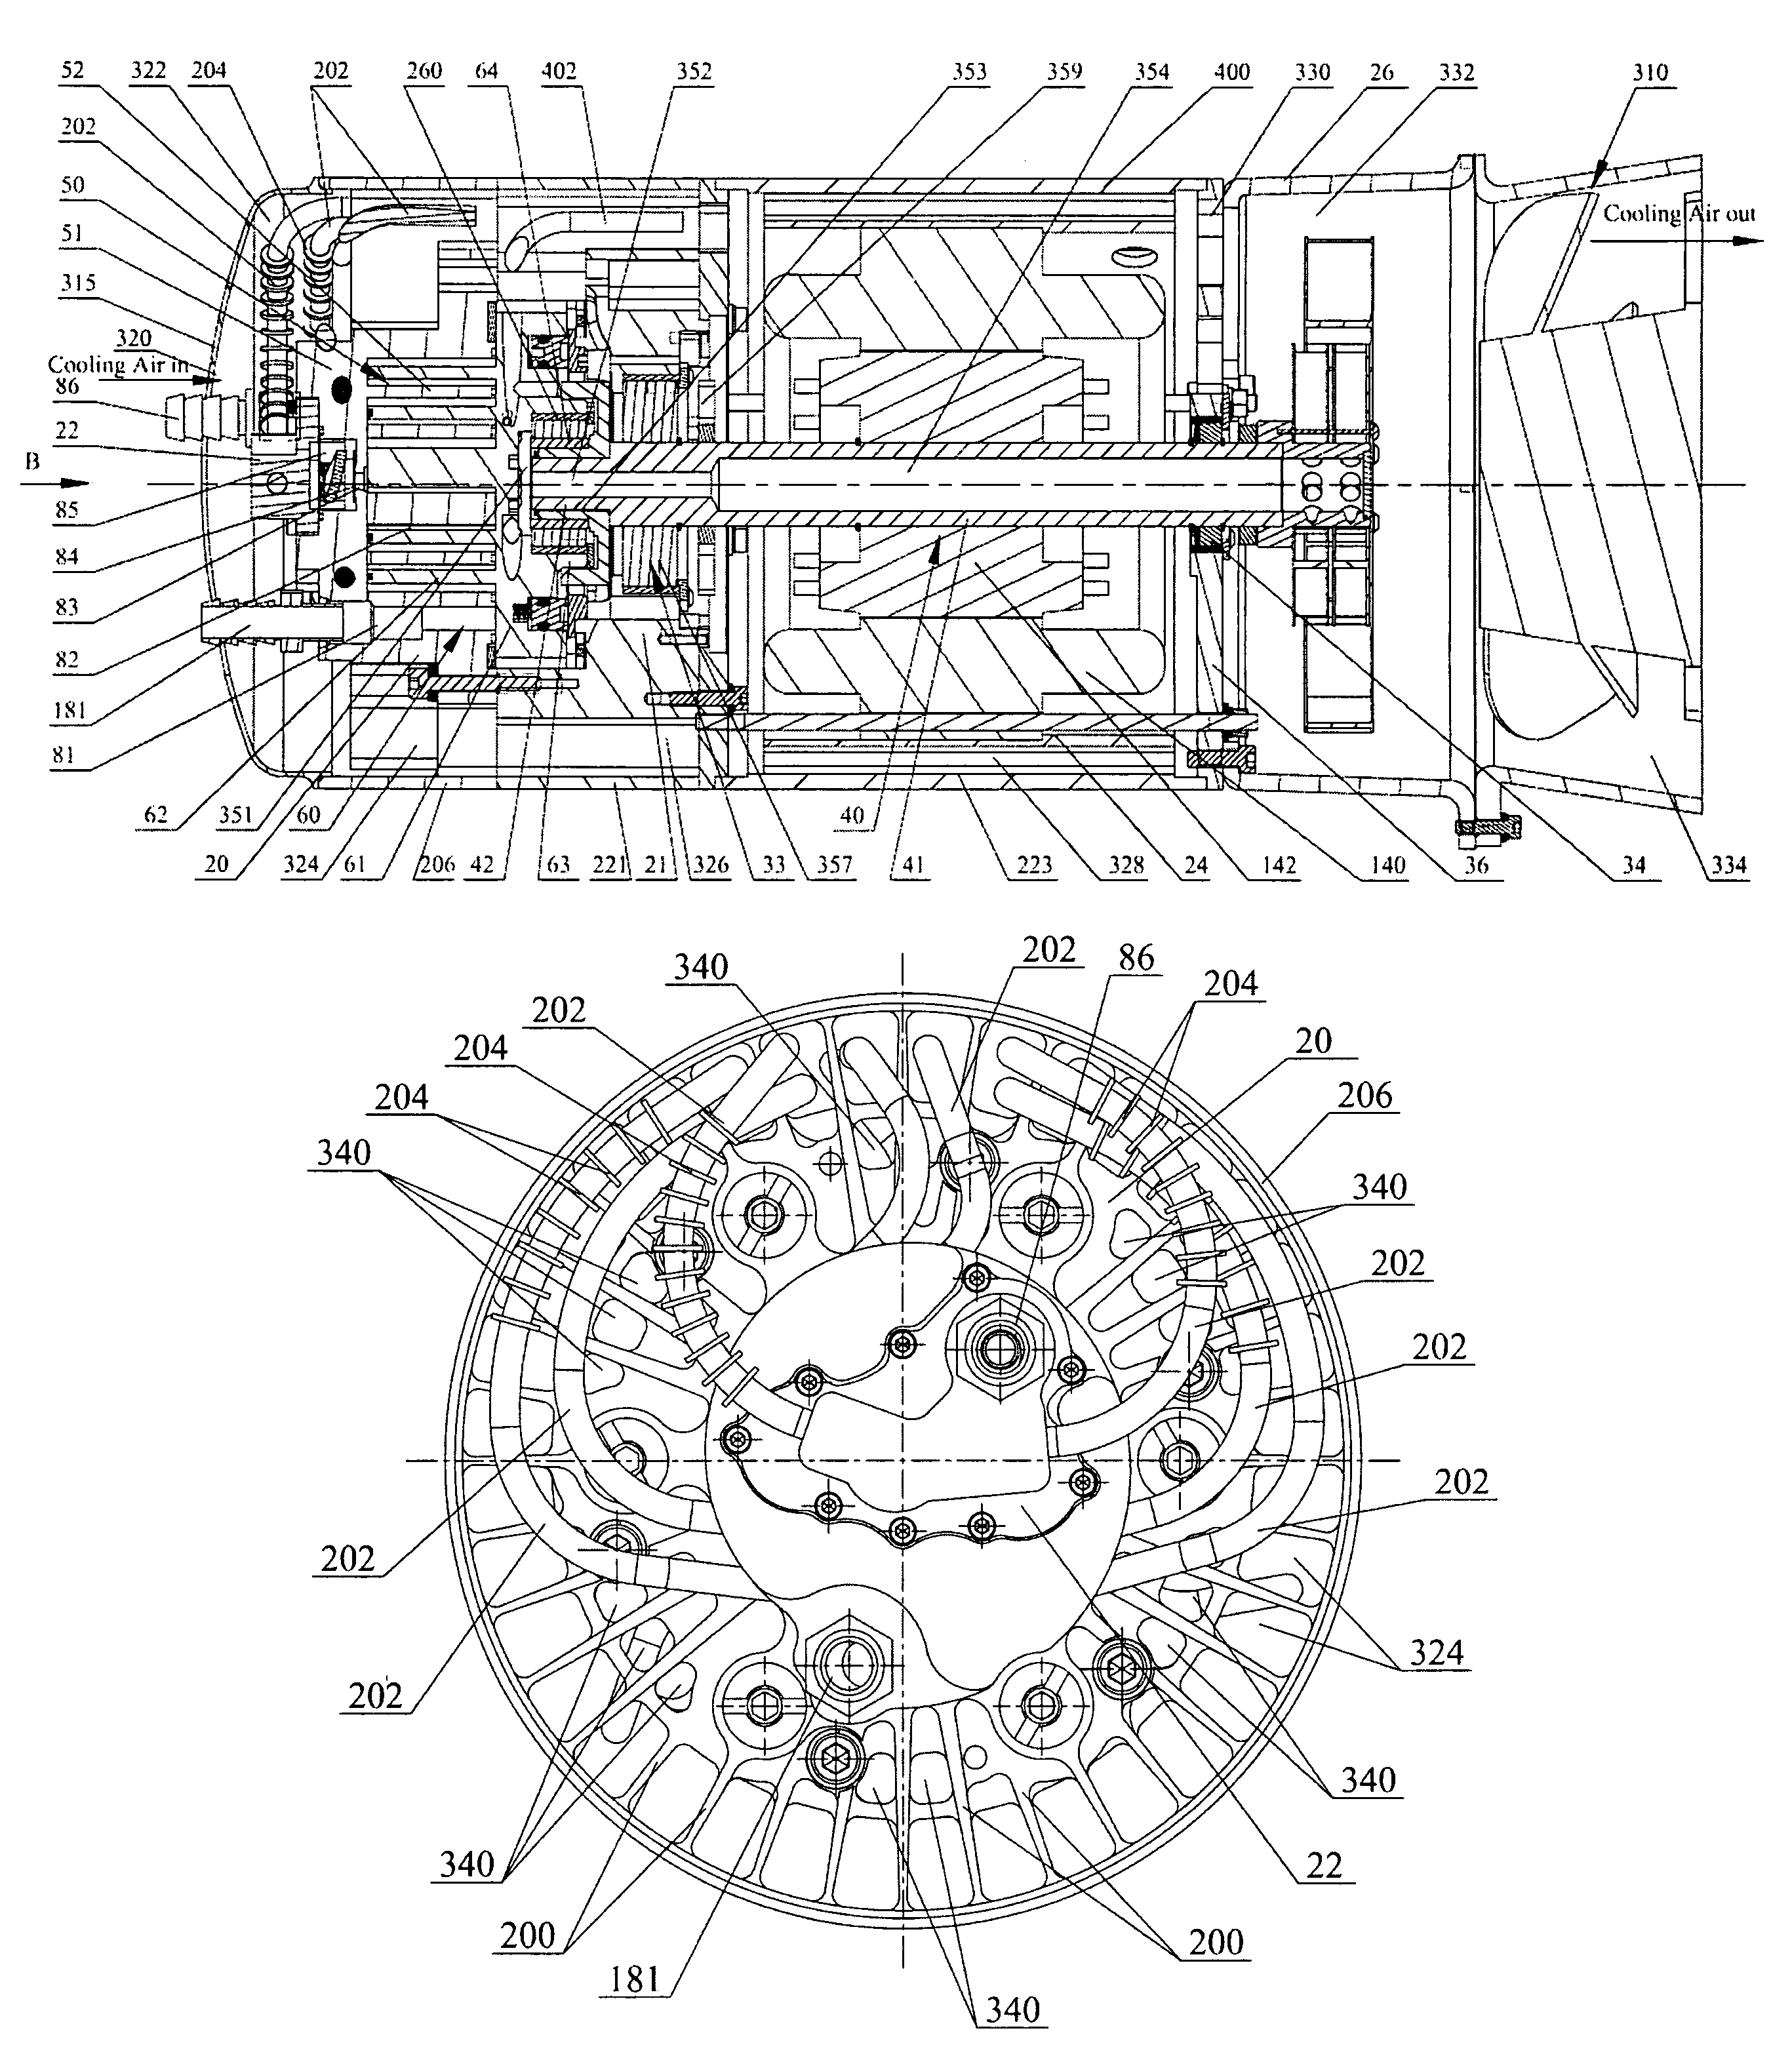 Scroll-type fluid displacement apparatus with improved cooling system